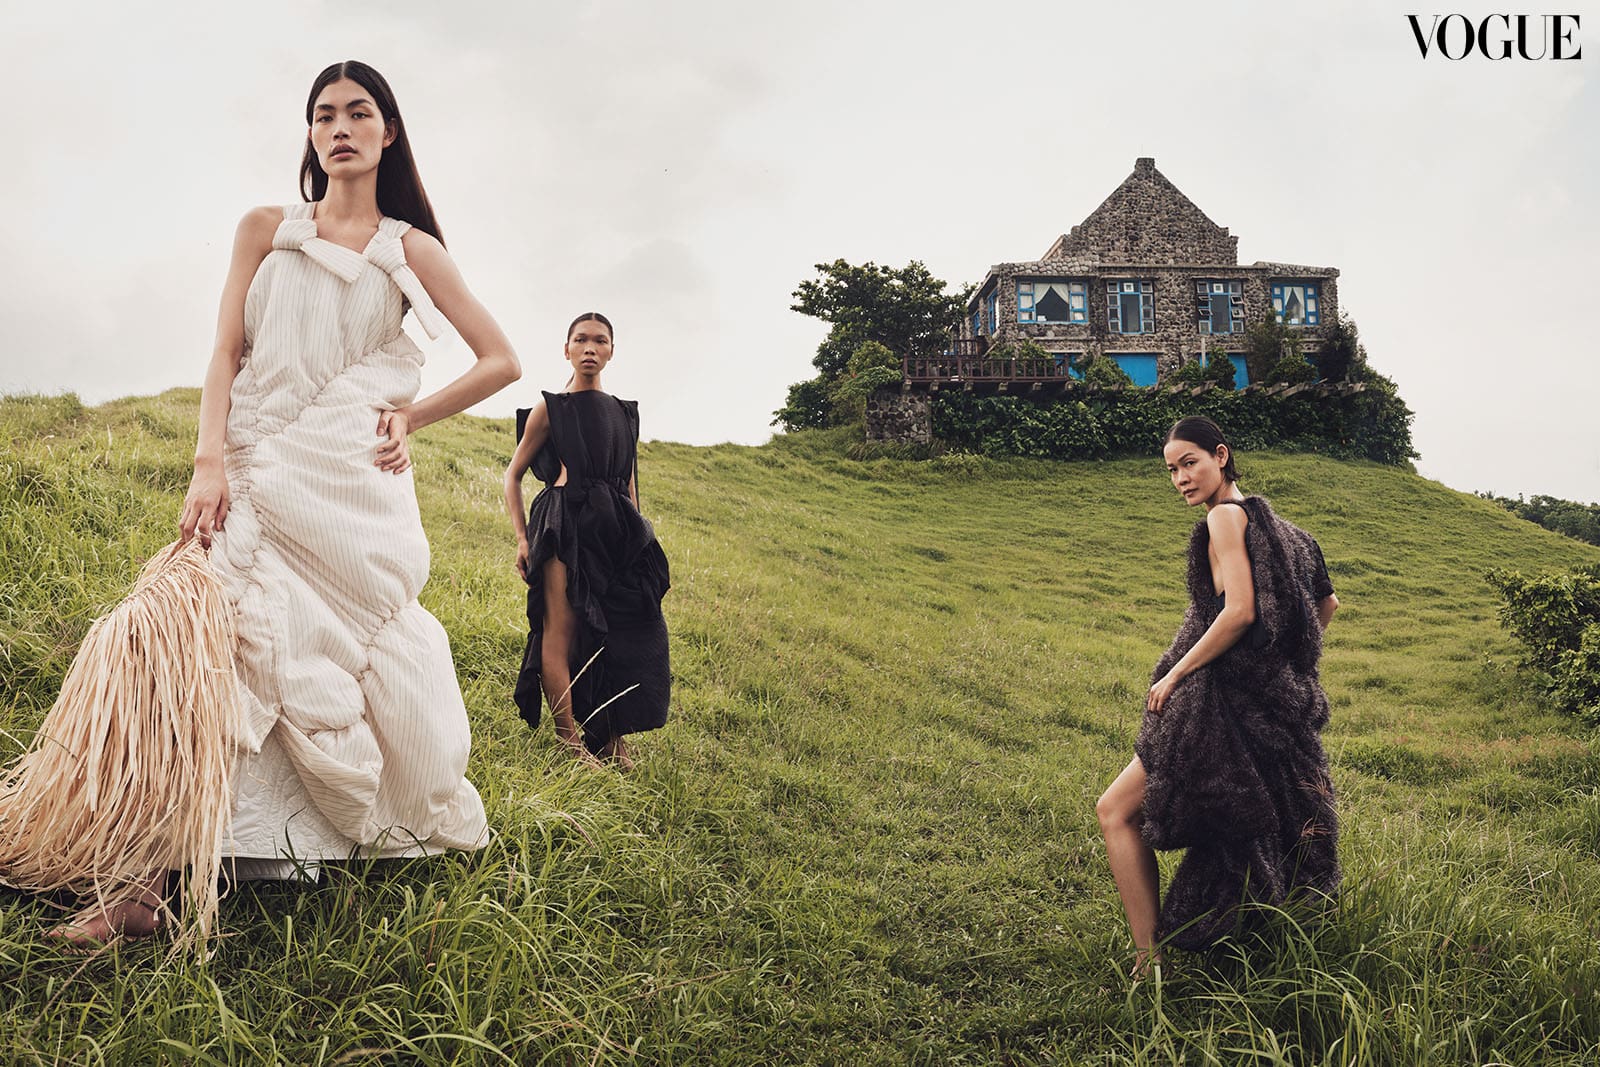 Rina, Lukresia, and Jo Ann wear NOVEL deconstructed puffer dresses molded from deadstock fabric to complement the female form through ruching and quilting manipulations, MELITTA BAUMEISTER white quilt skirt. All wear Ivatan Tukap rope sandals.